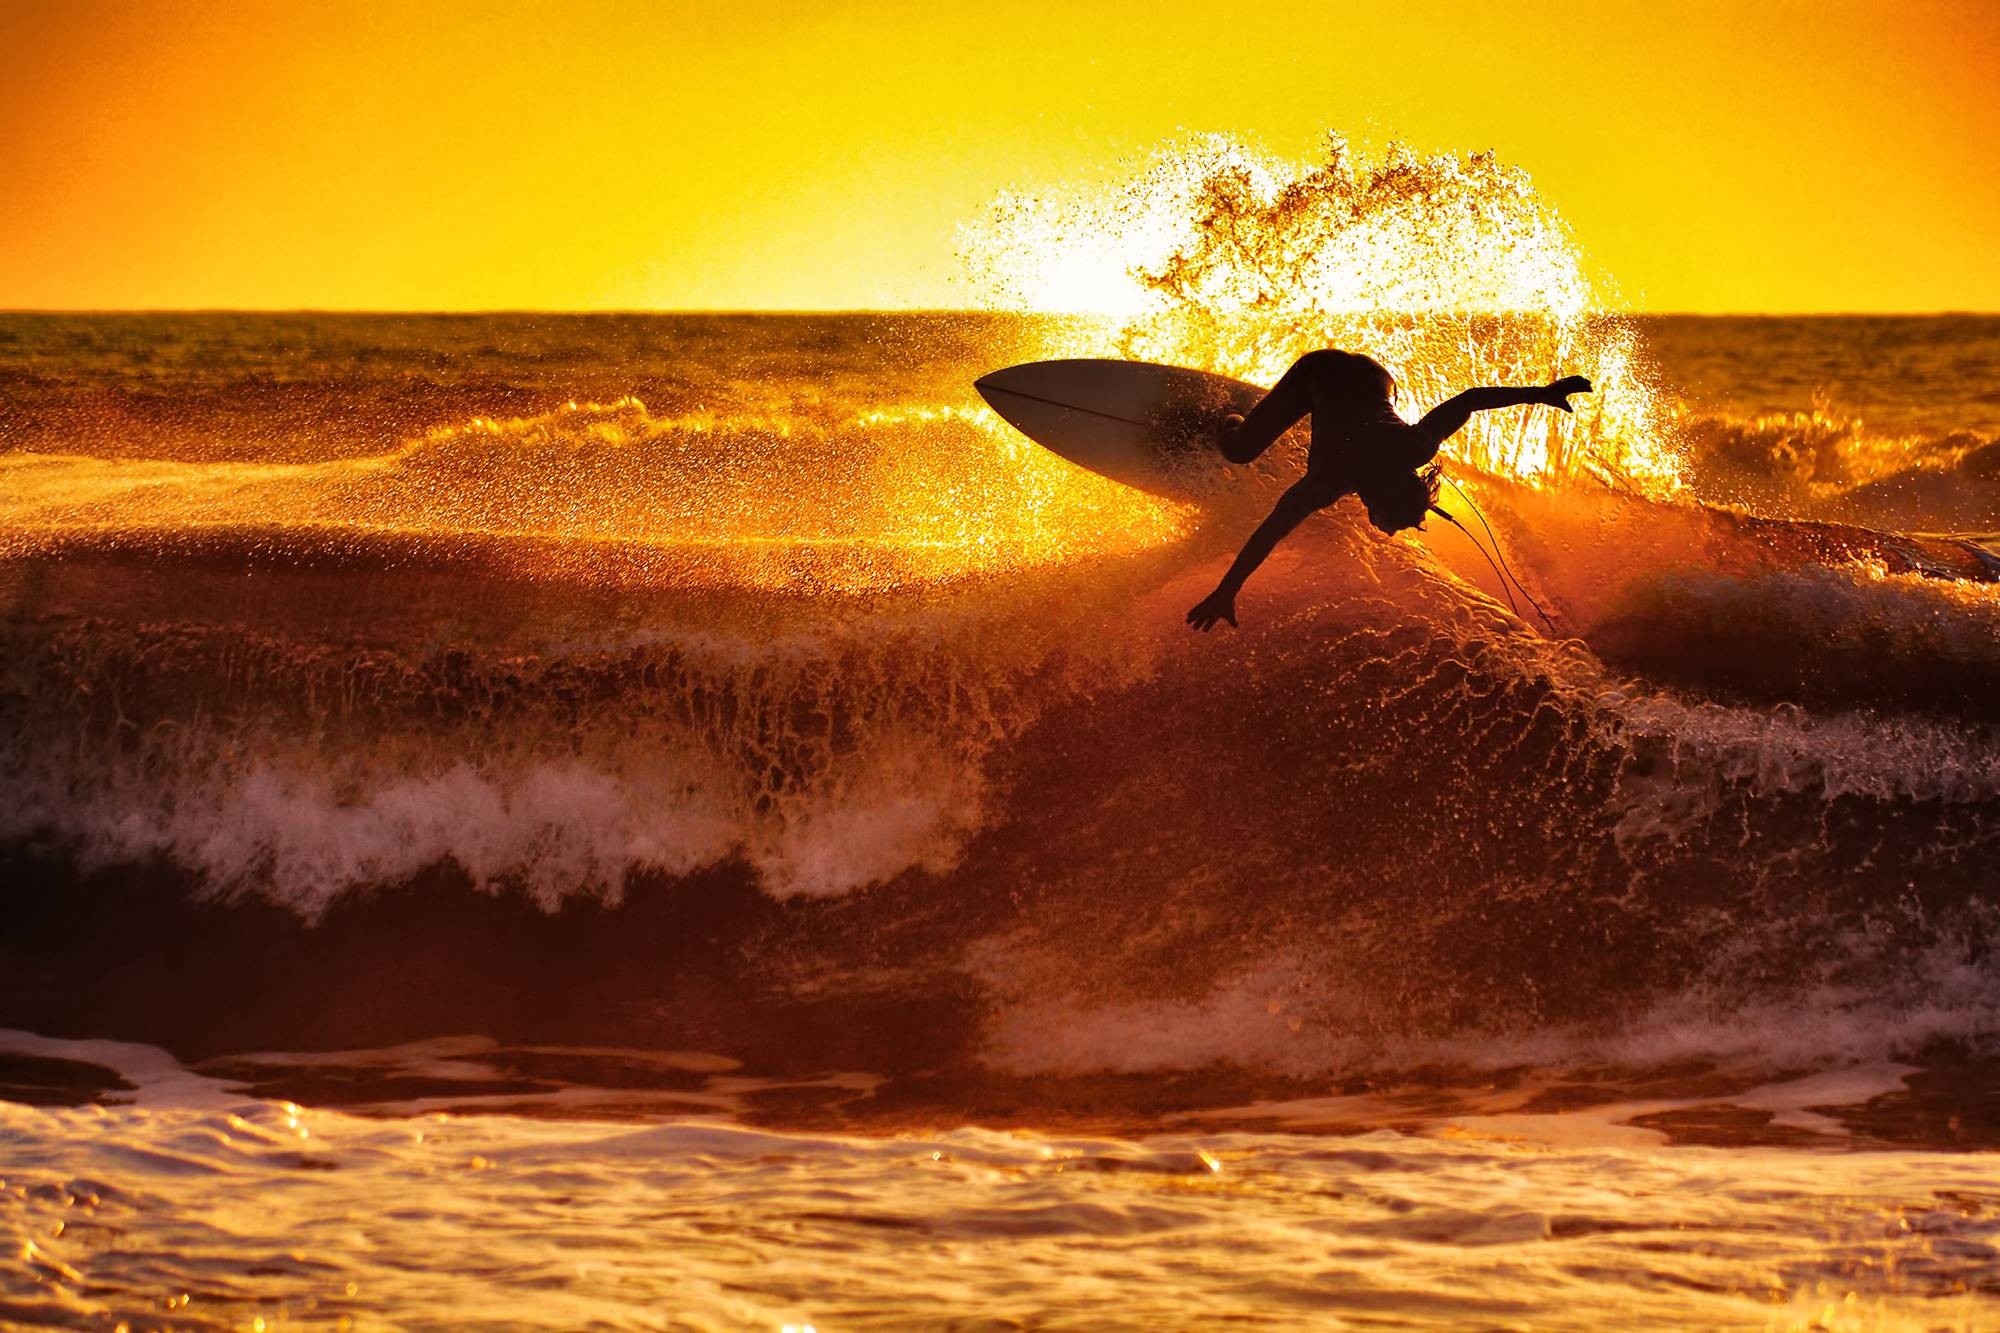 Surfing Waves Sunset Wallpapers Hd Desktop And Mobile Backgrounds